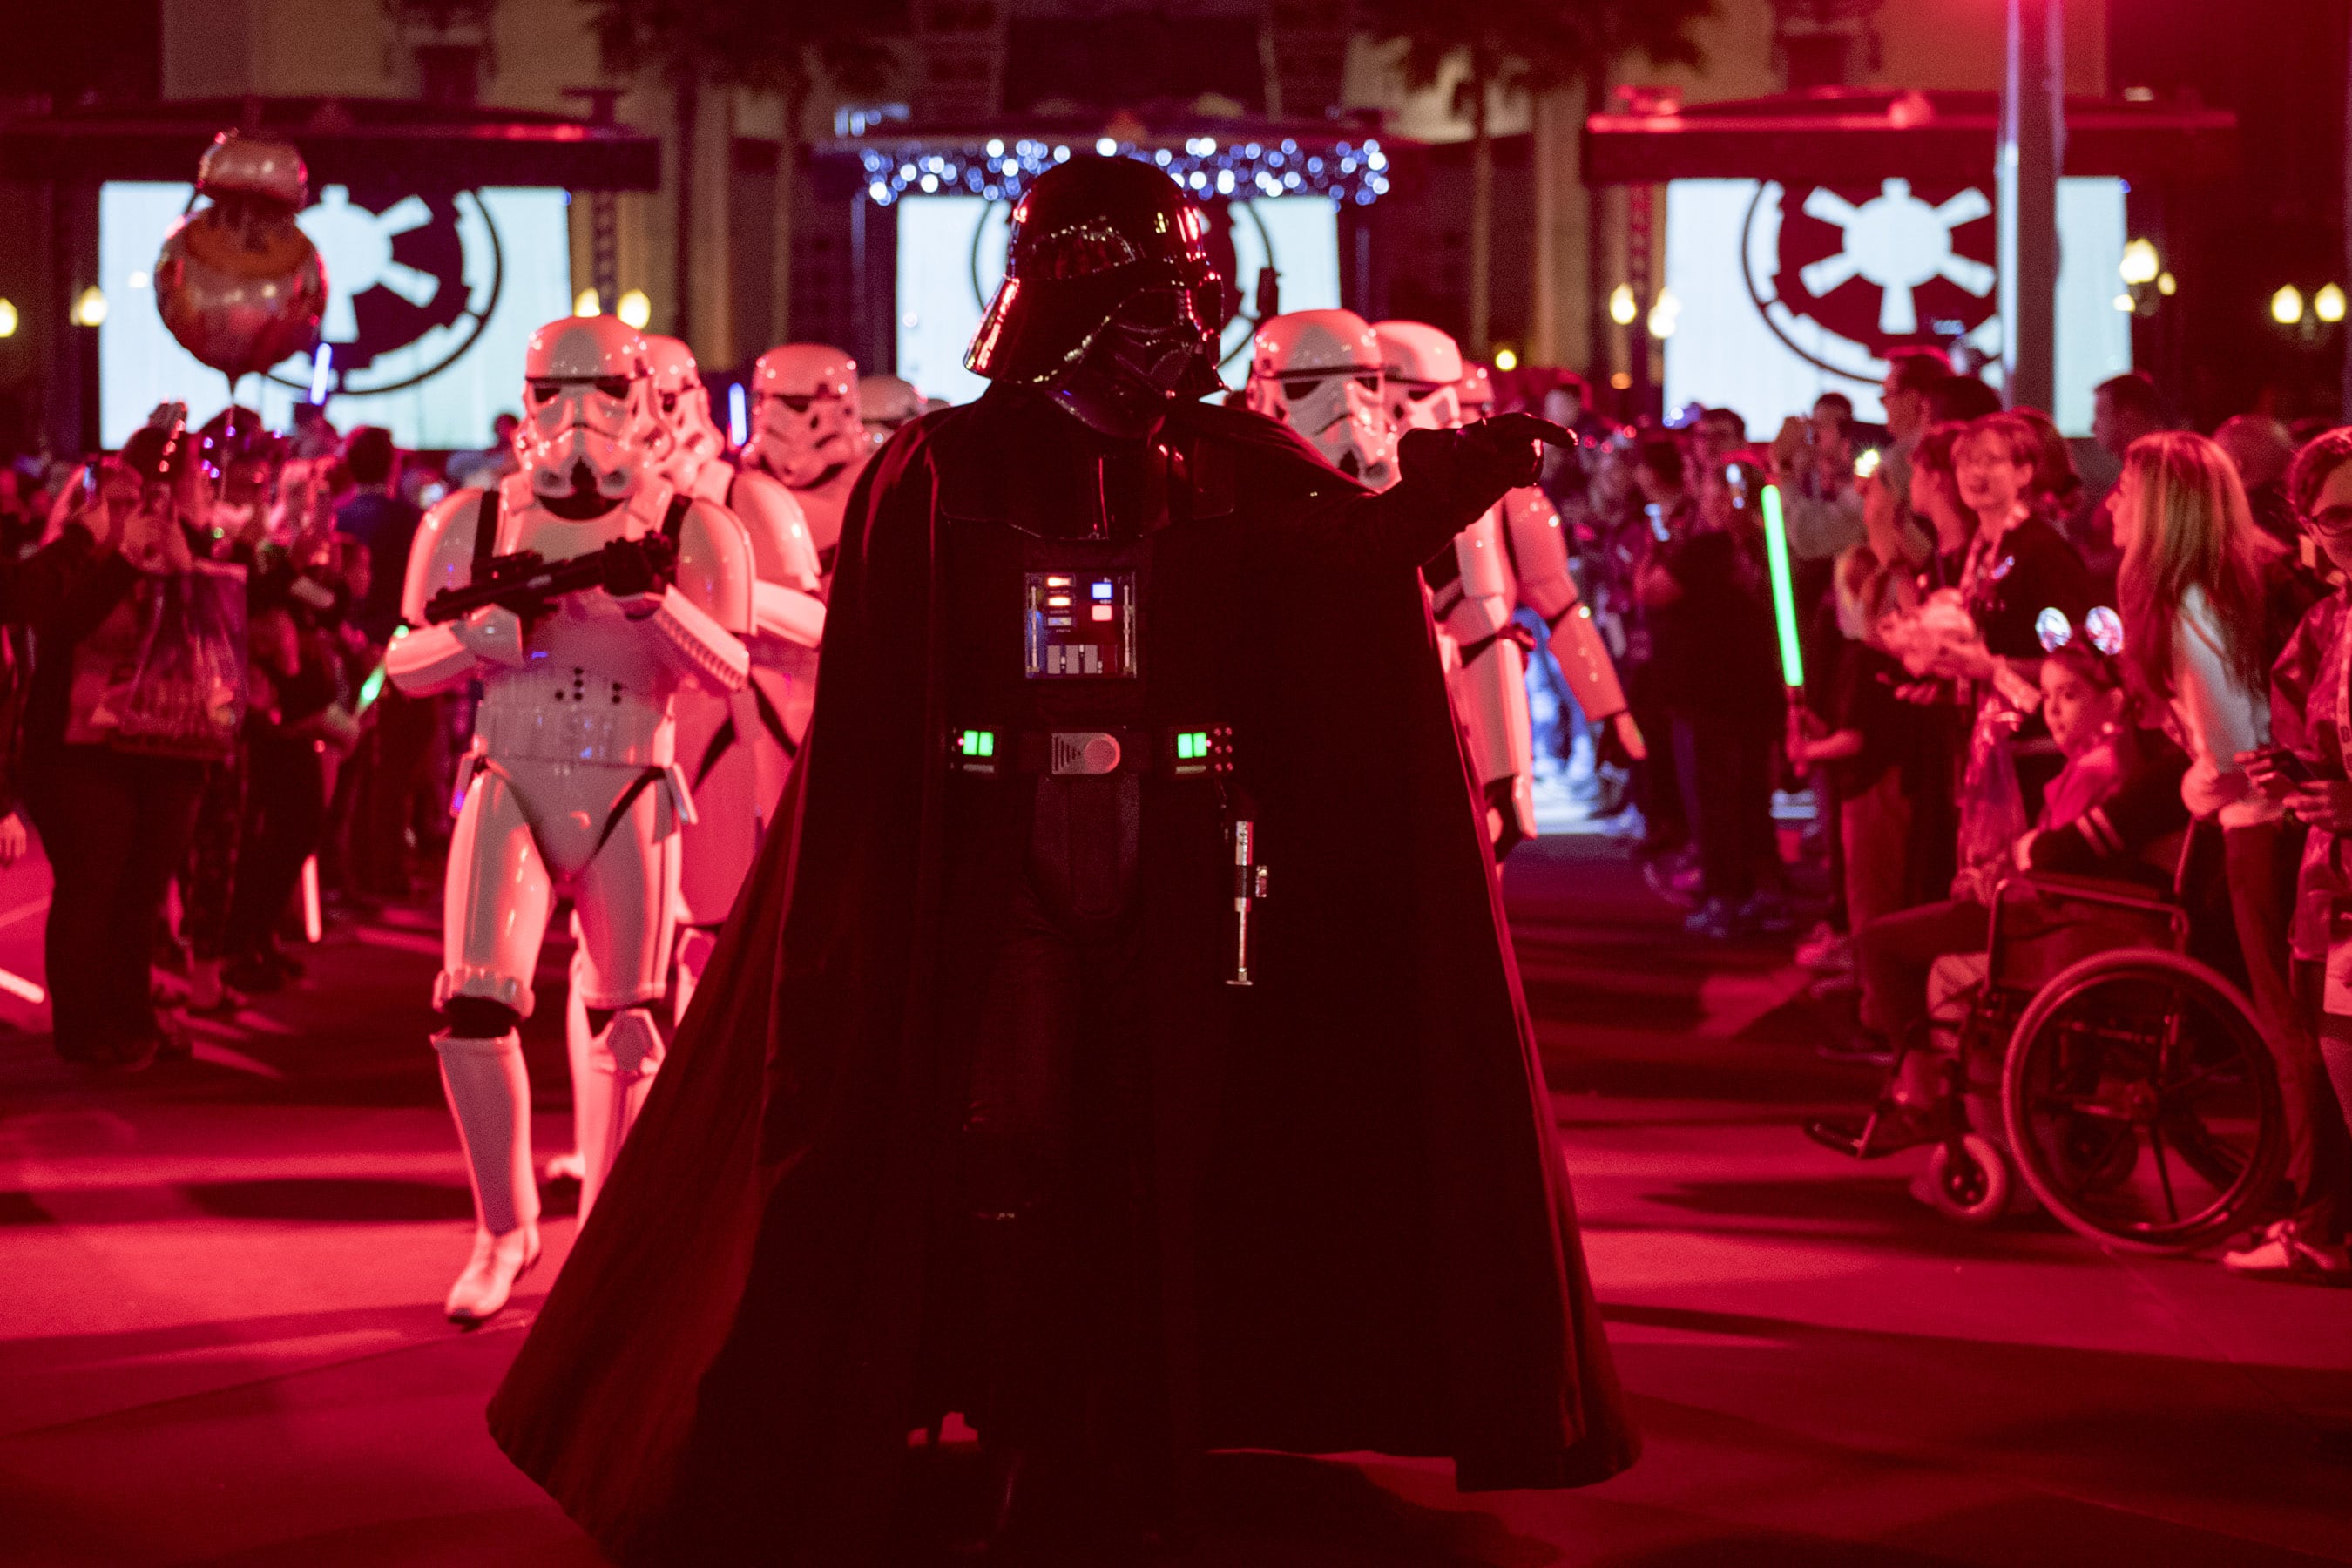 Tickets on sale for Star Wars Galactic Nights at Disney’s Hollywood